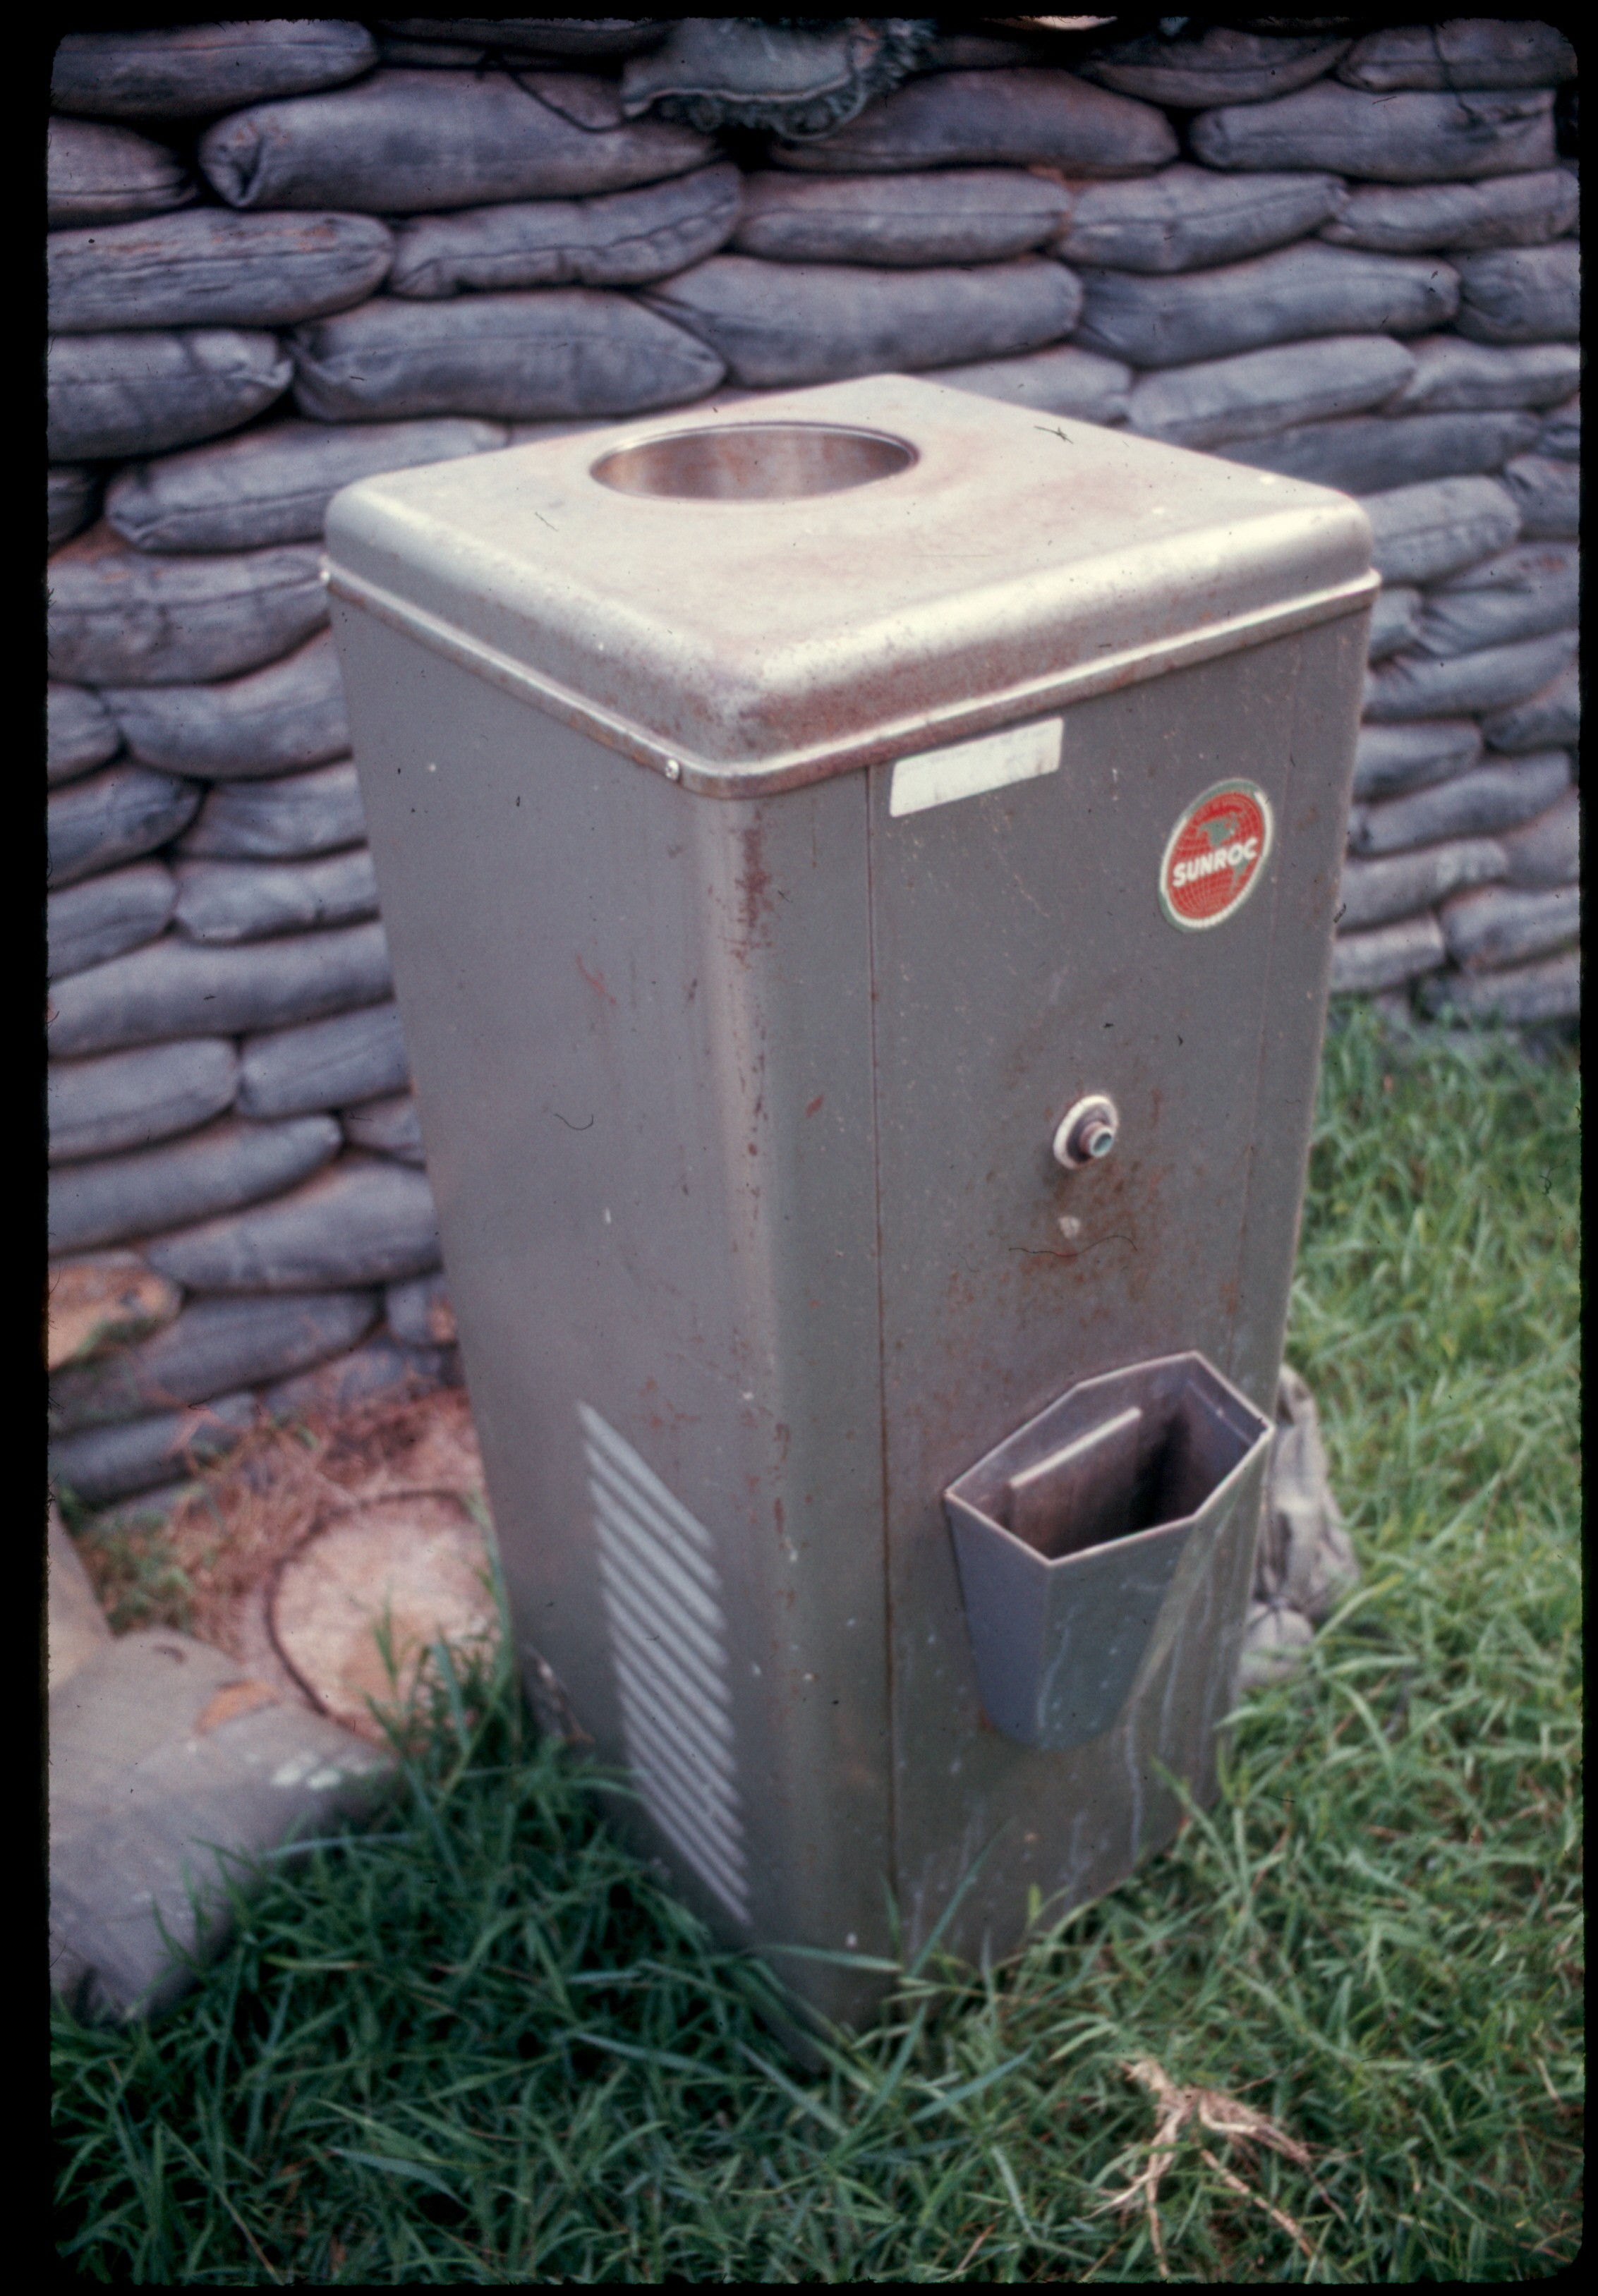 ss 025 1970 06 03 water cooler and sand bags outside barracks